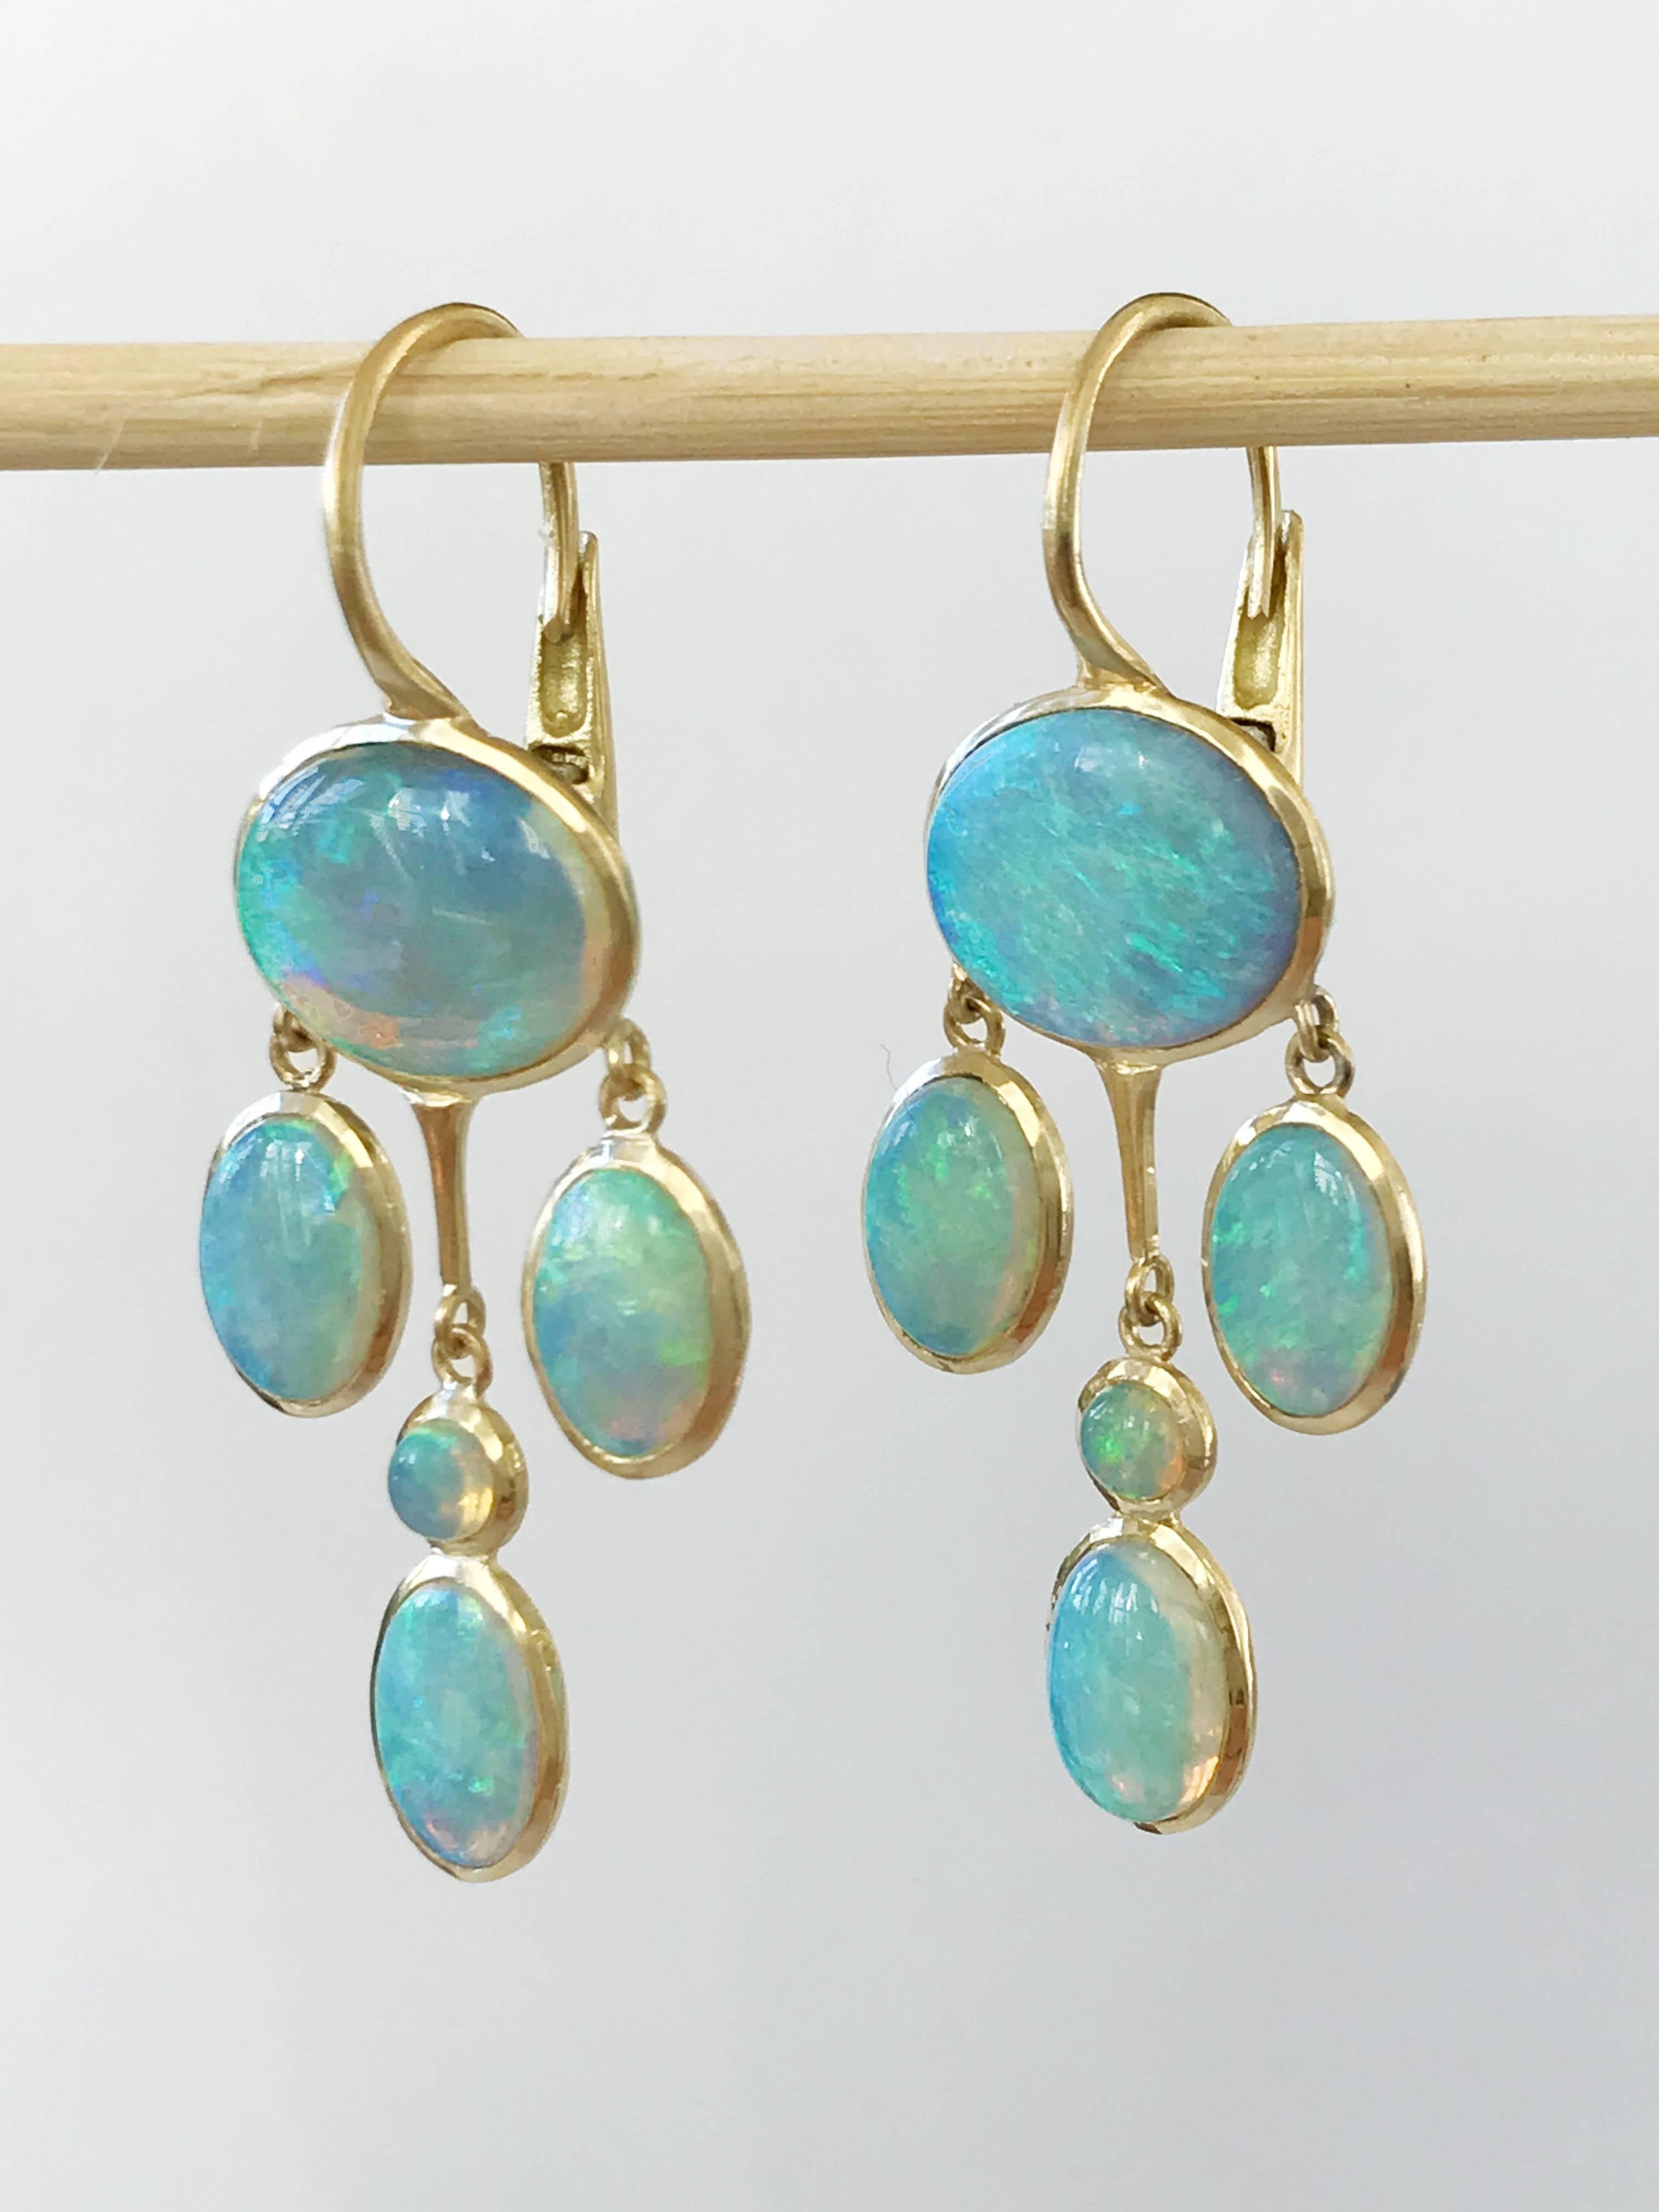 Dalben design 18k yellow gold semi lucid finishing earrings with 10 bezel set Australian Opals .  
Dimension:  
width 14,8 mm , height without leverback 28,2 mm  
The earrings has been designed and handcrafted in our atelier in Como Italy with a